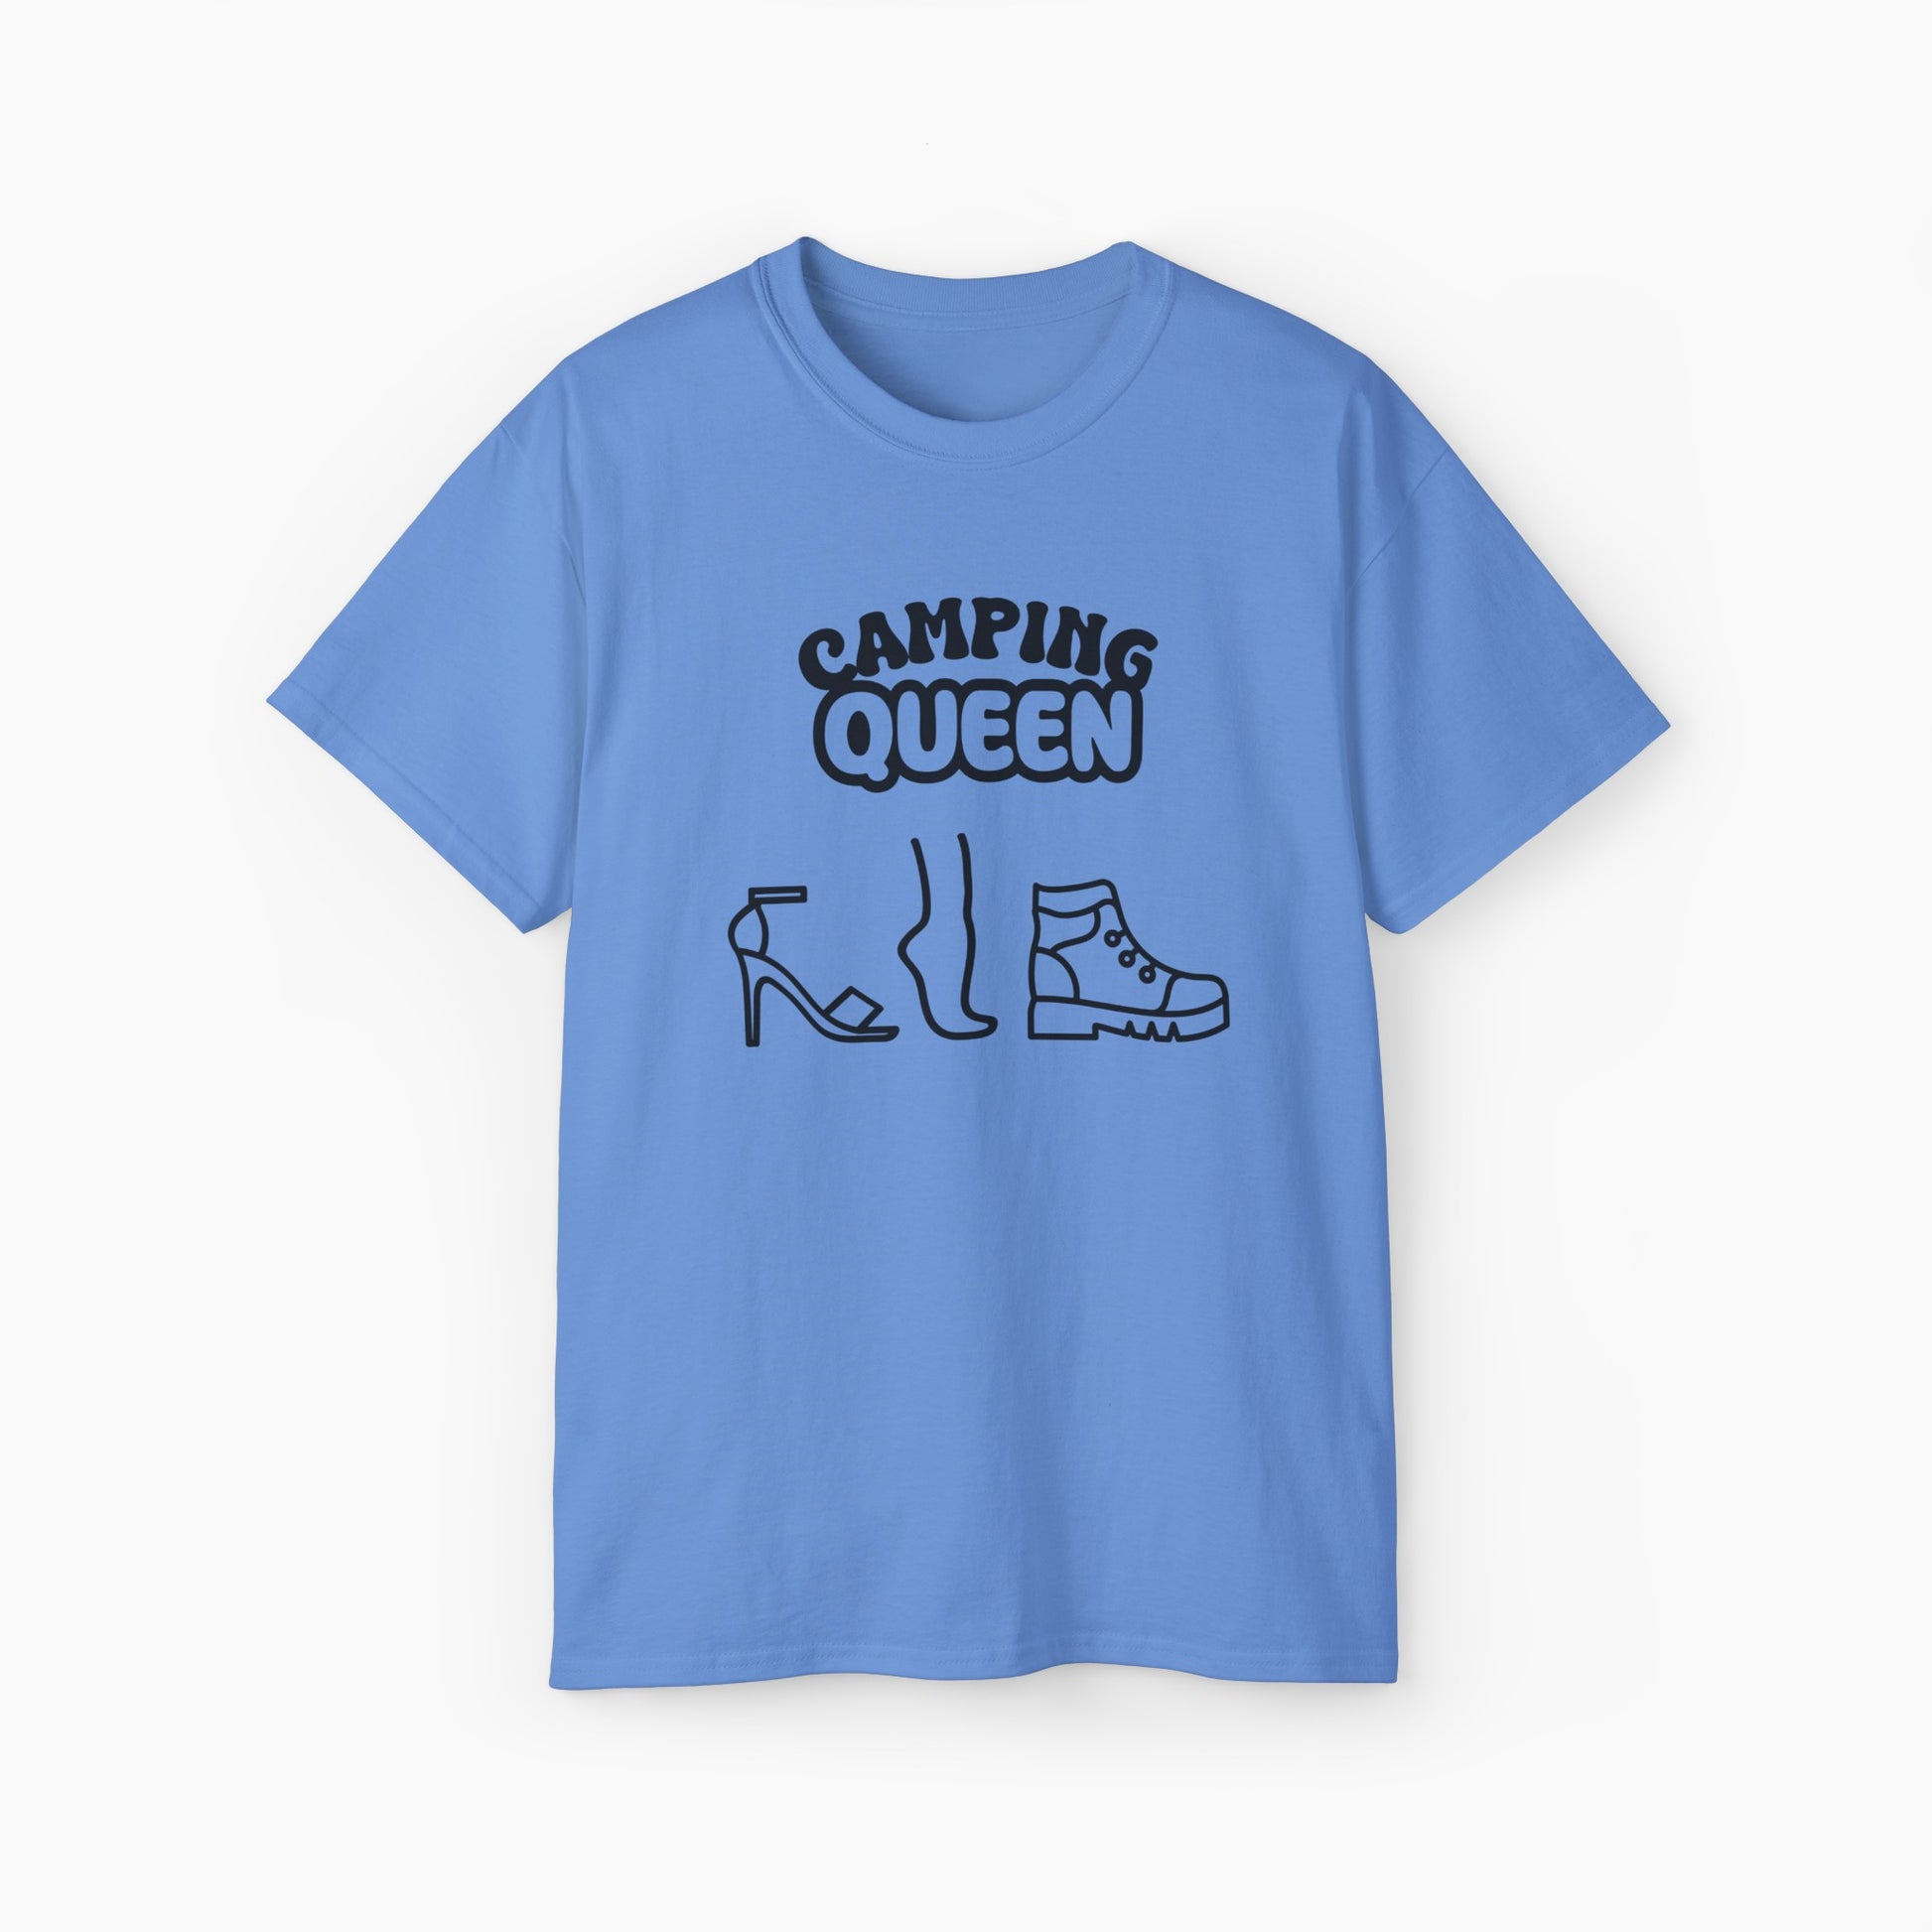 Blue t-shirt with 'Camping Queen' text, illustrated with a high heel, a foot, and a boot, on a plain background.